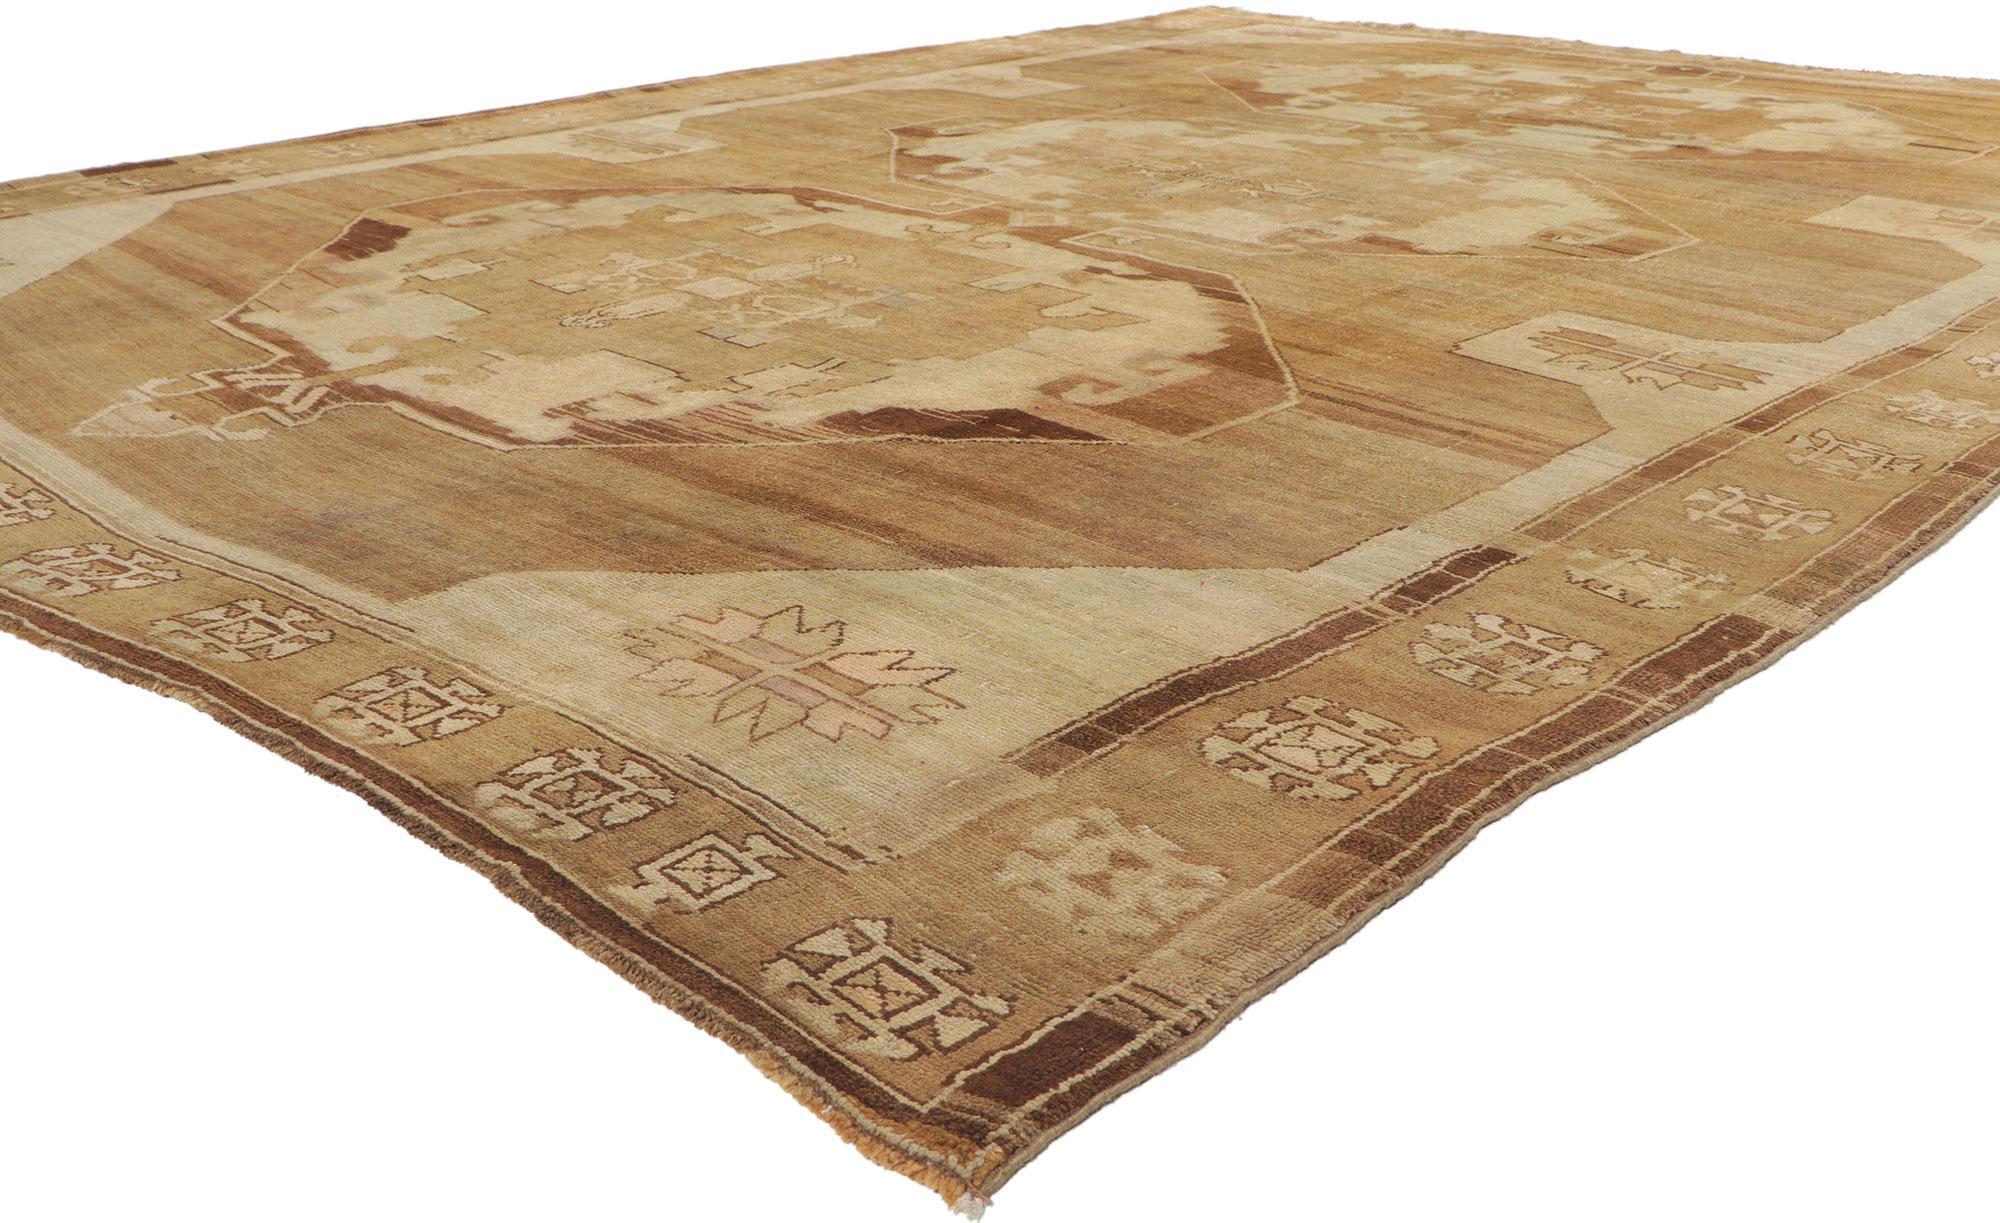 77709 Vintage Turkish Kars Rug, 09'06 x 12'01. Kars rugs, originating from the northeastern Turkish city of Kars, epitomize a distinctive genre of handwoven carpets. Crafted by adept artisans who uphold centuries-old techniques, these rugs showcase